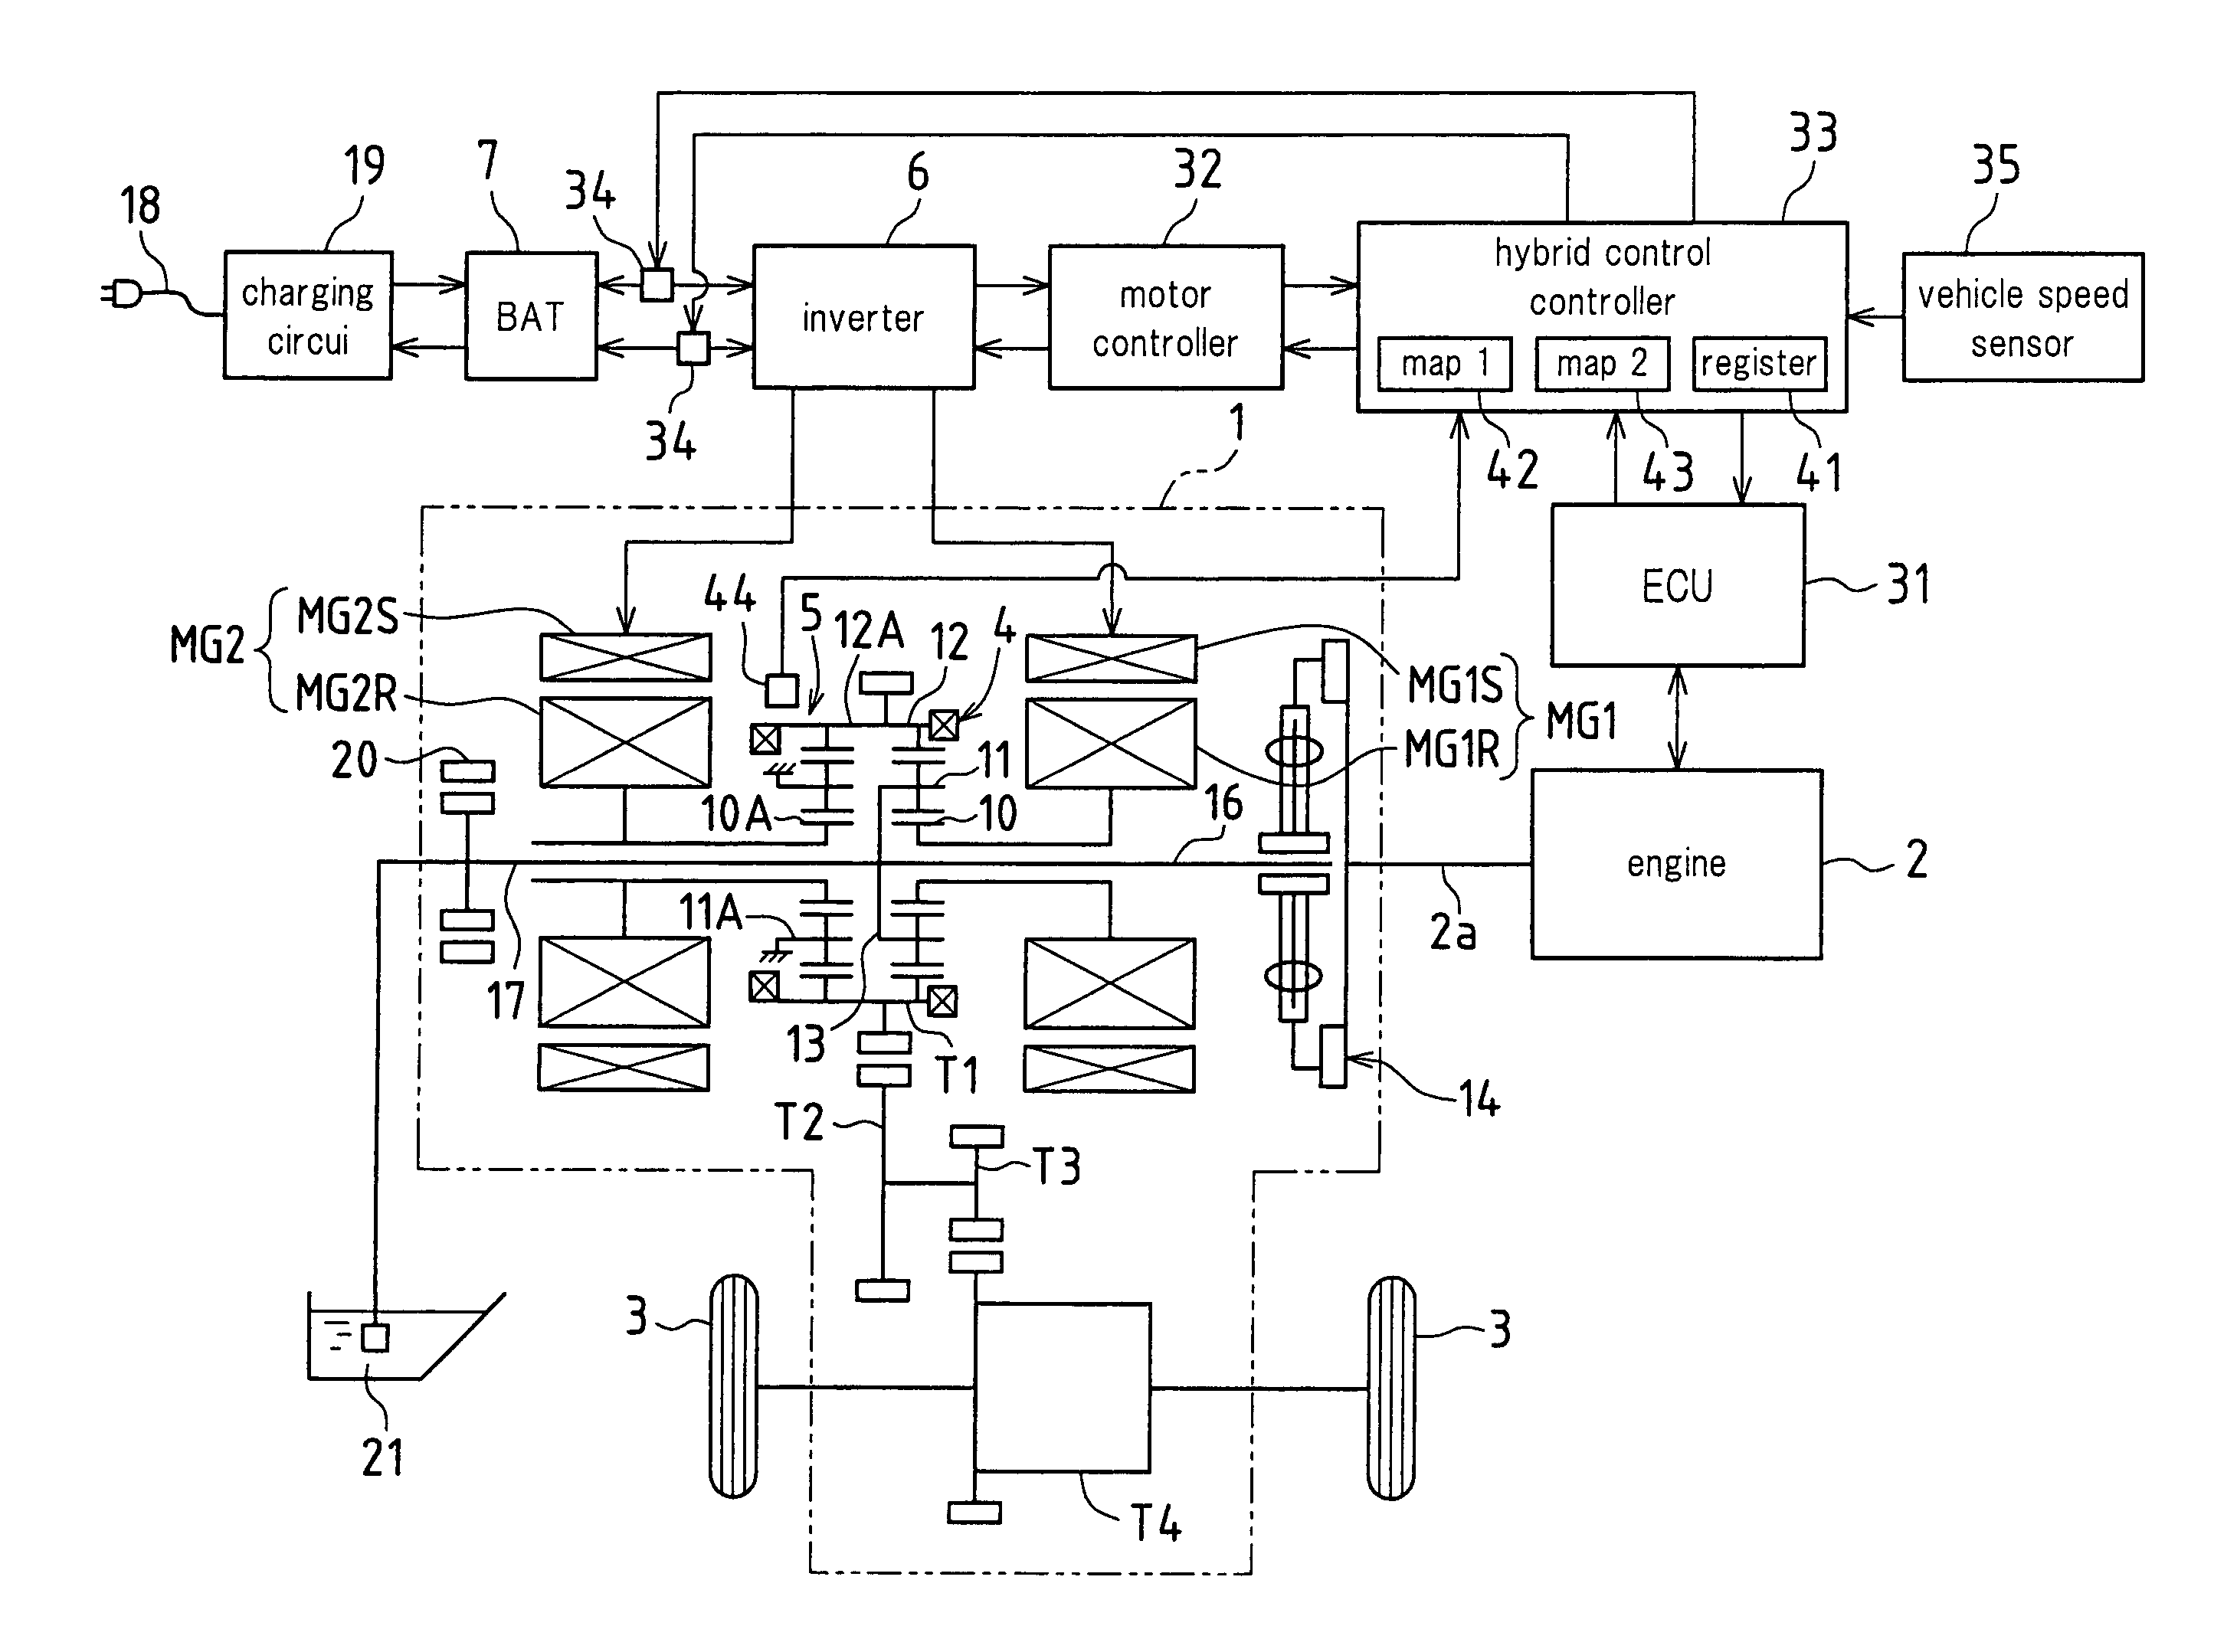 Control apparatus of vehicle drive apparatus and plug-in hybrid vehicle